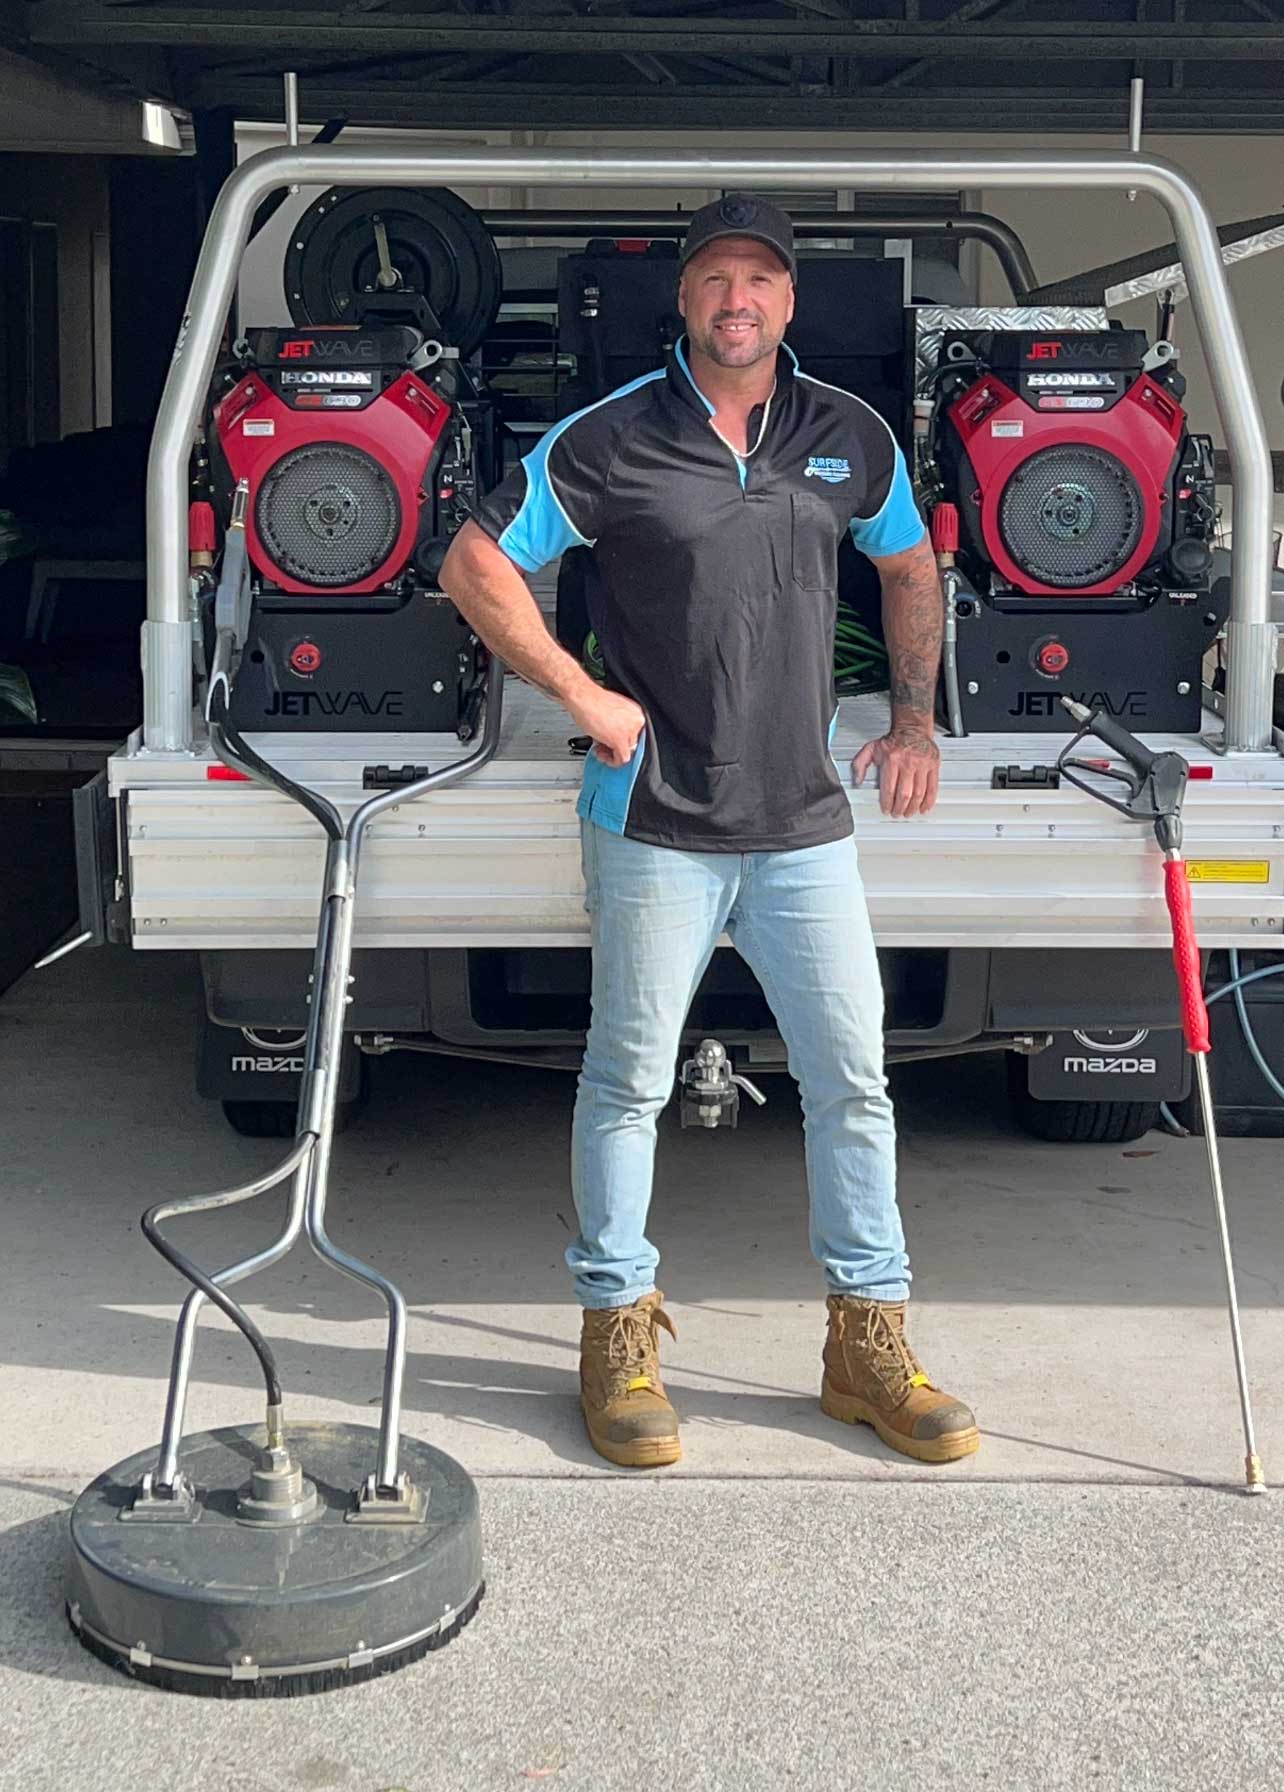 Peter from Surfside Pressure Cleaning - an expert pressure cleaner Sunshine Coast